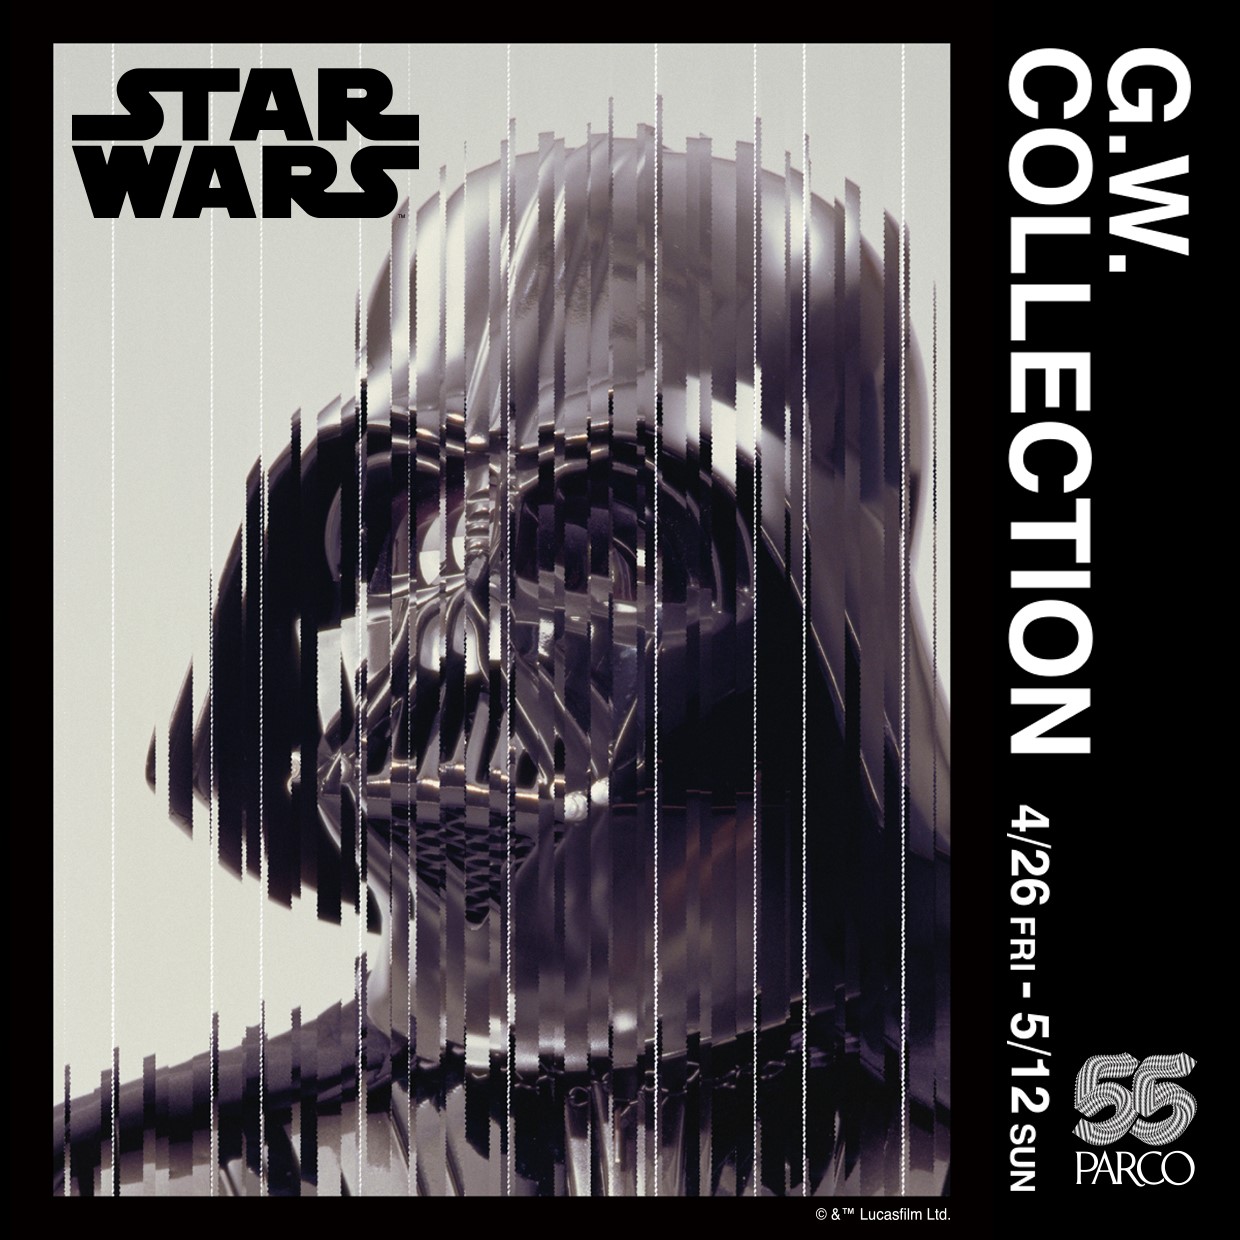 STAR WARS G.W. COLLECTION ​-PARCO 55th CAMPAIGN-​にT-BASE渋谷PARCO店も参加!!オリジナルTシャツを発売!!